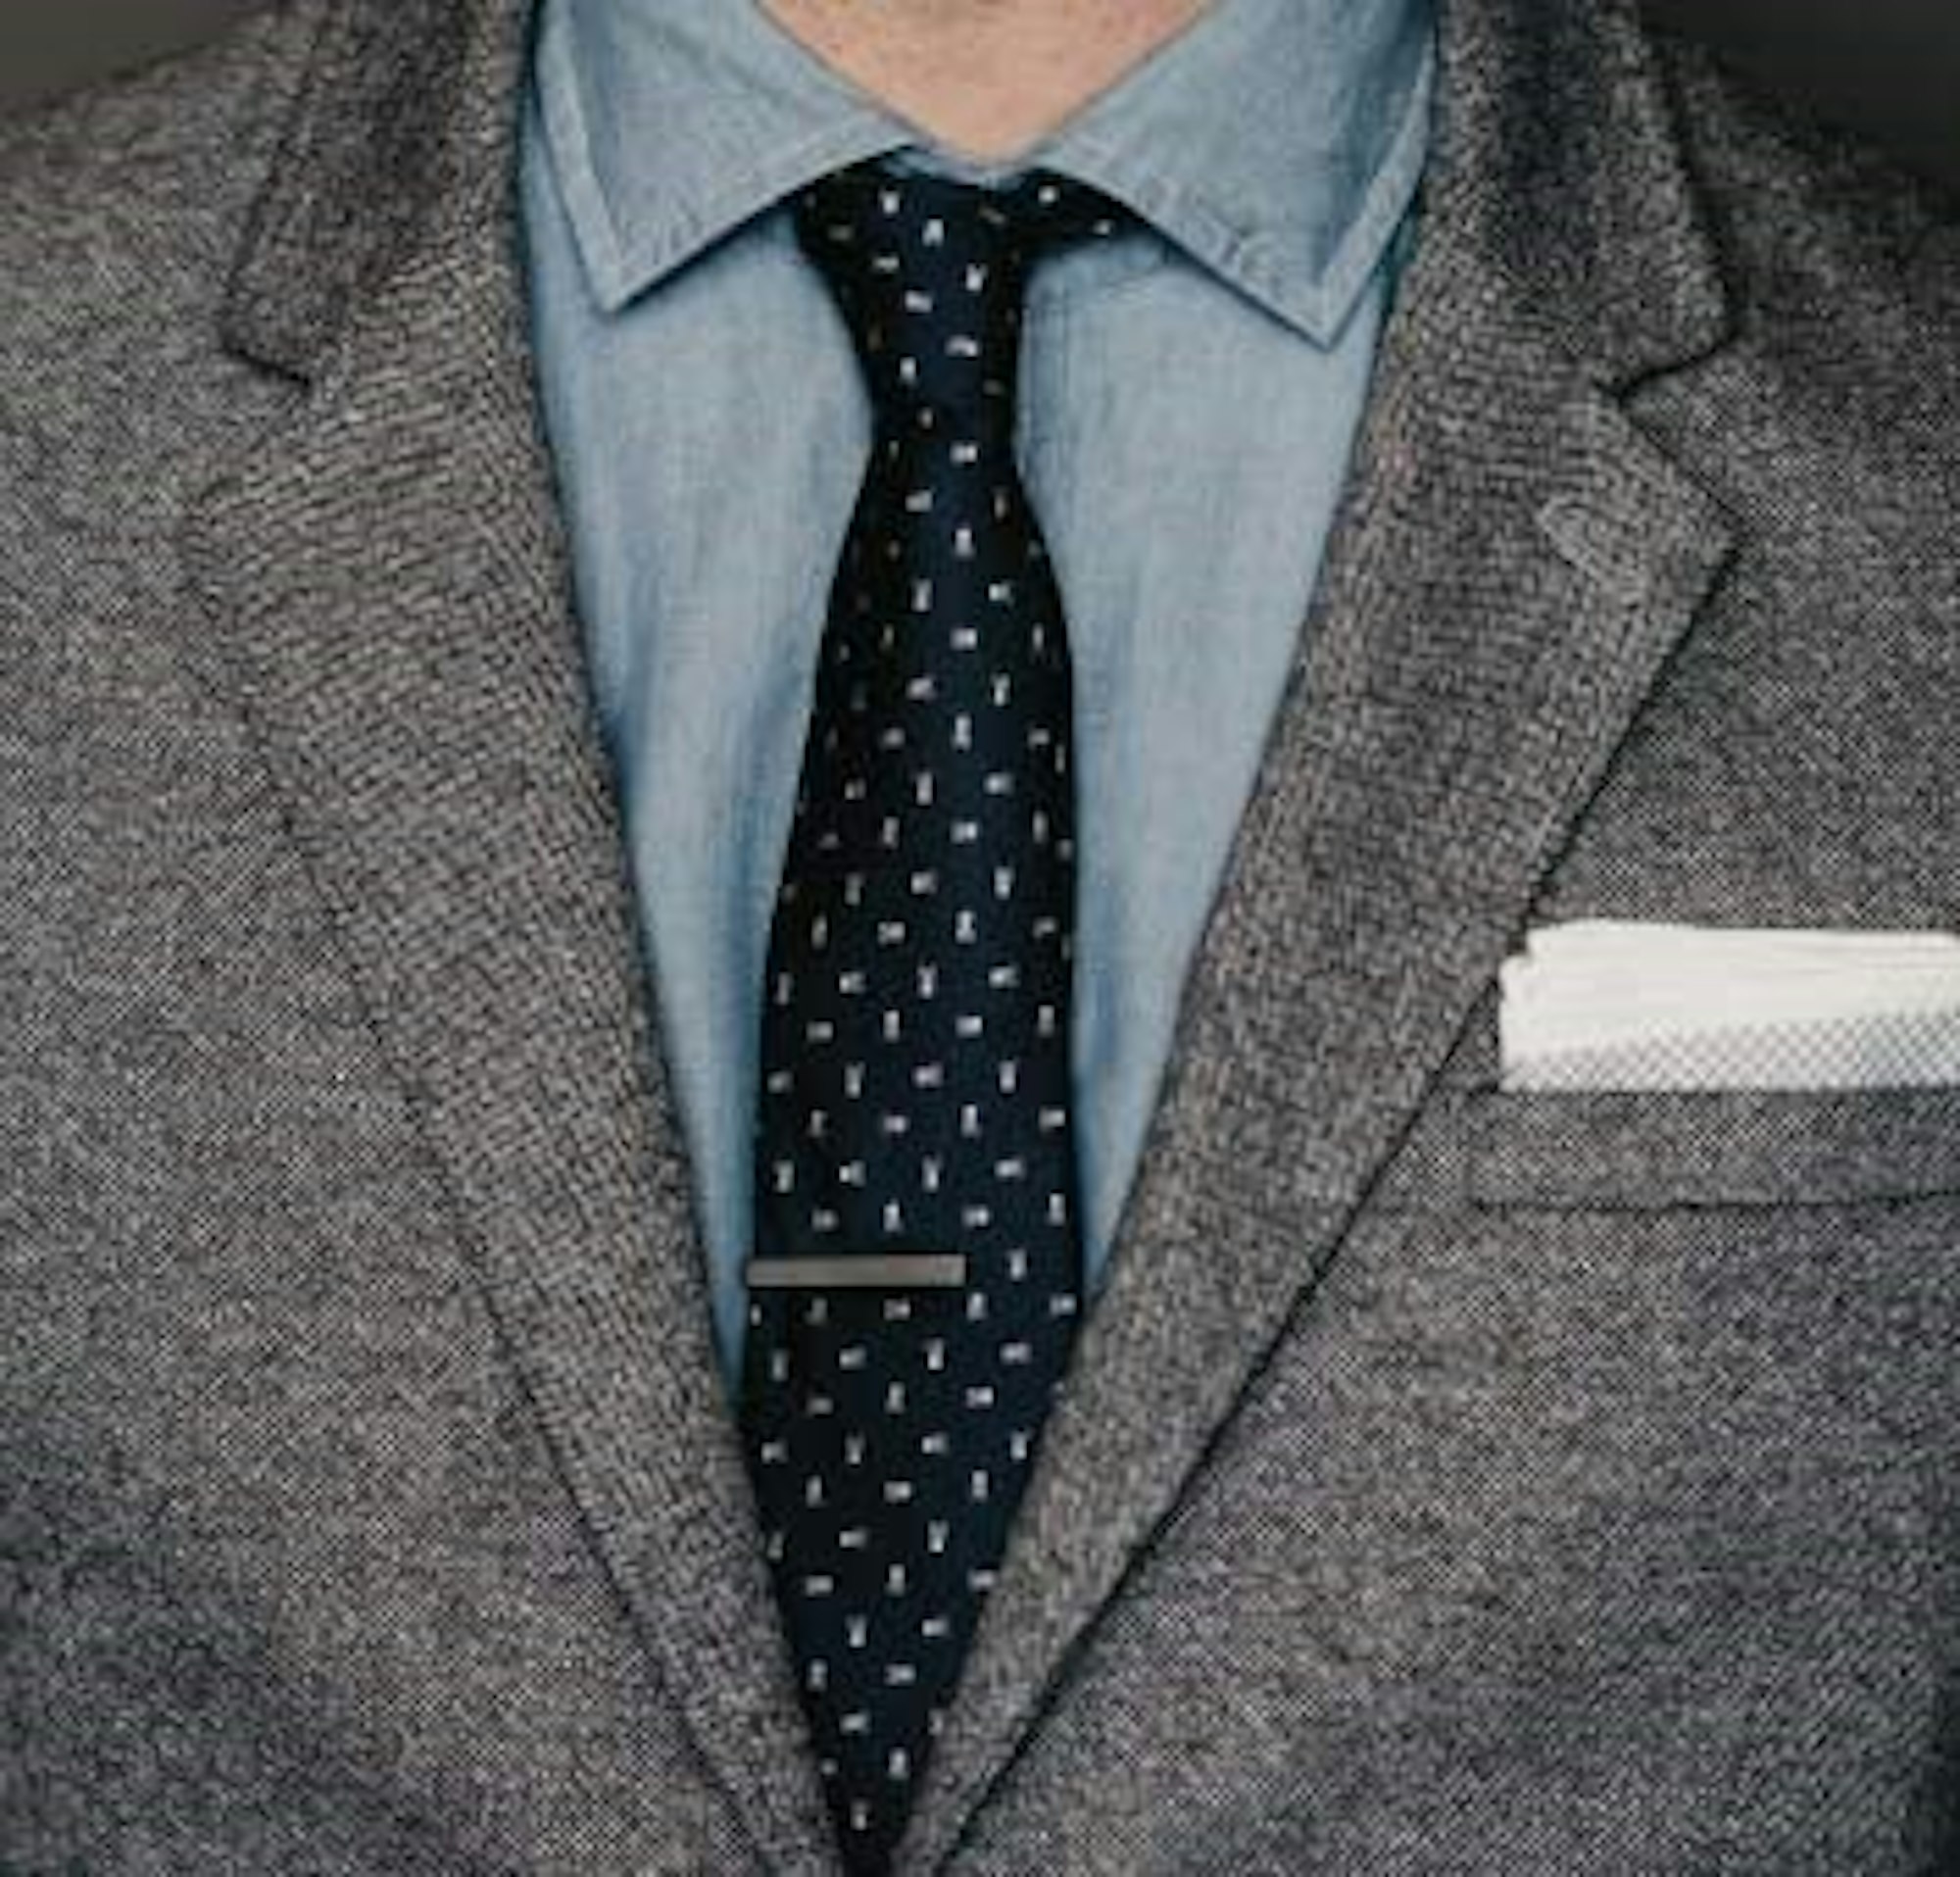 About Us | Tie Bar